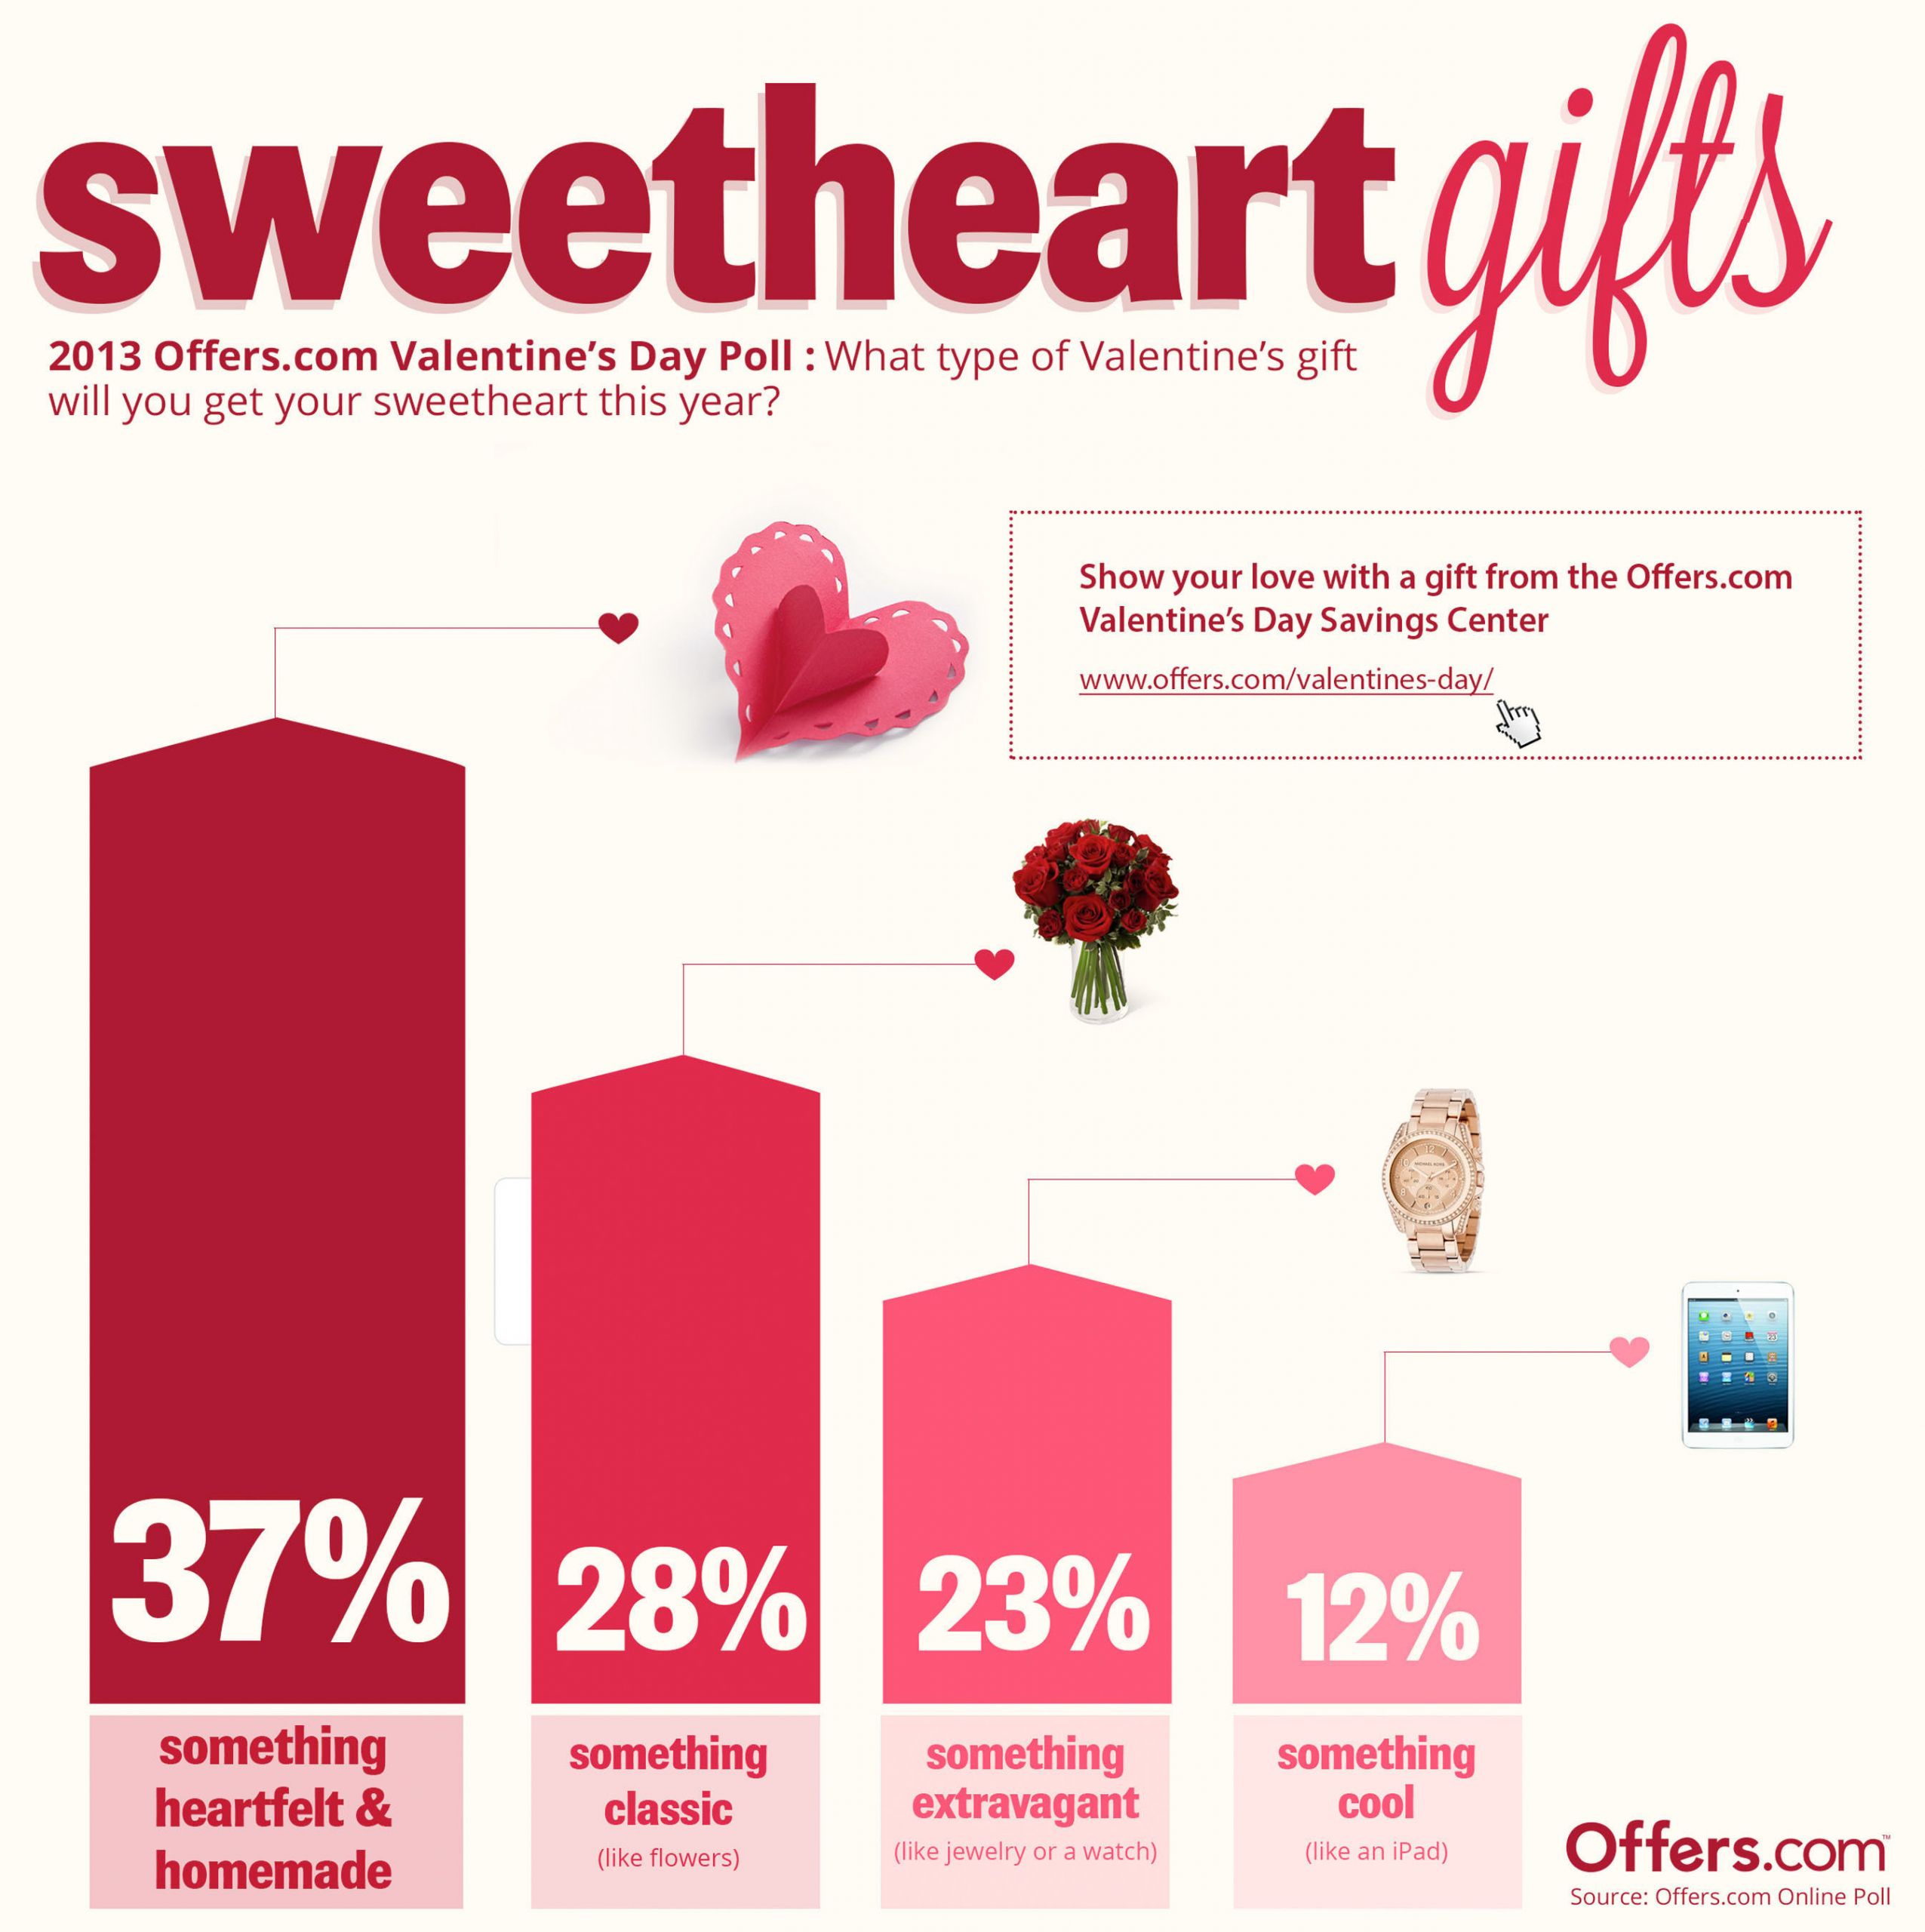 Gay Valentine Gift Ideas
 fers Poll Reveals Top 4 Gift Ideas for Valentine’s Day